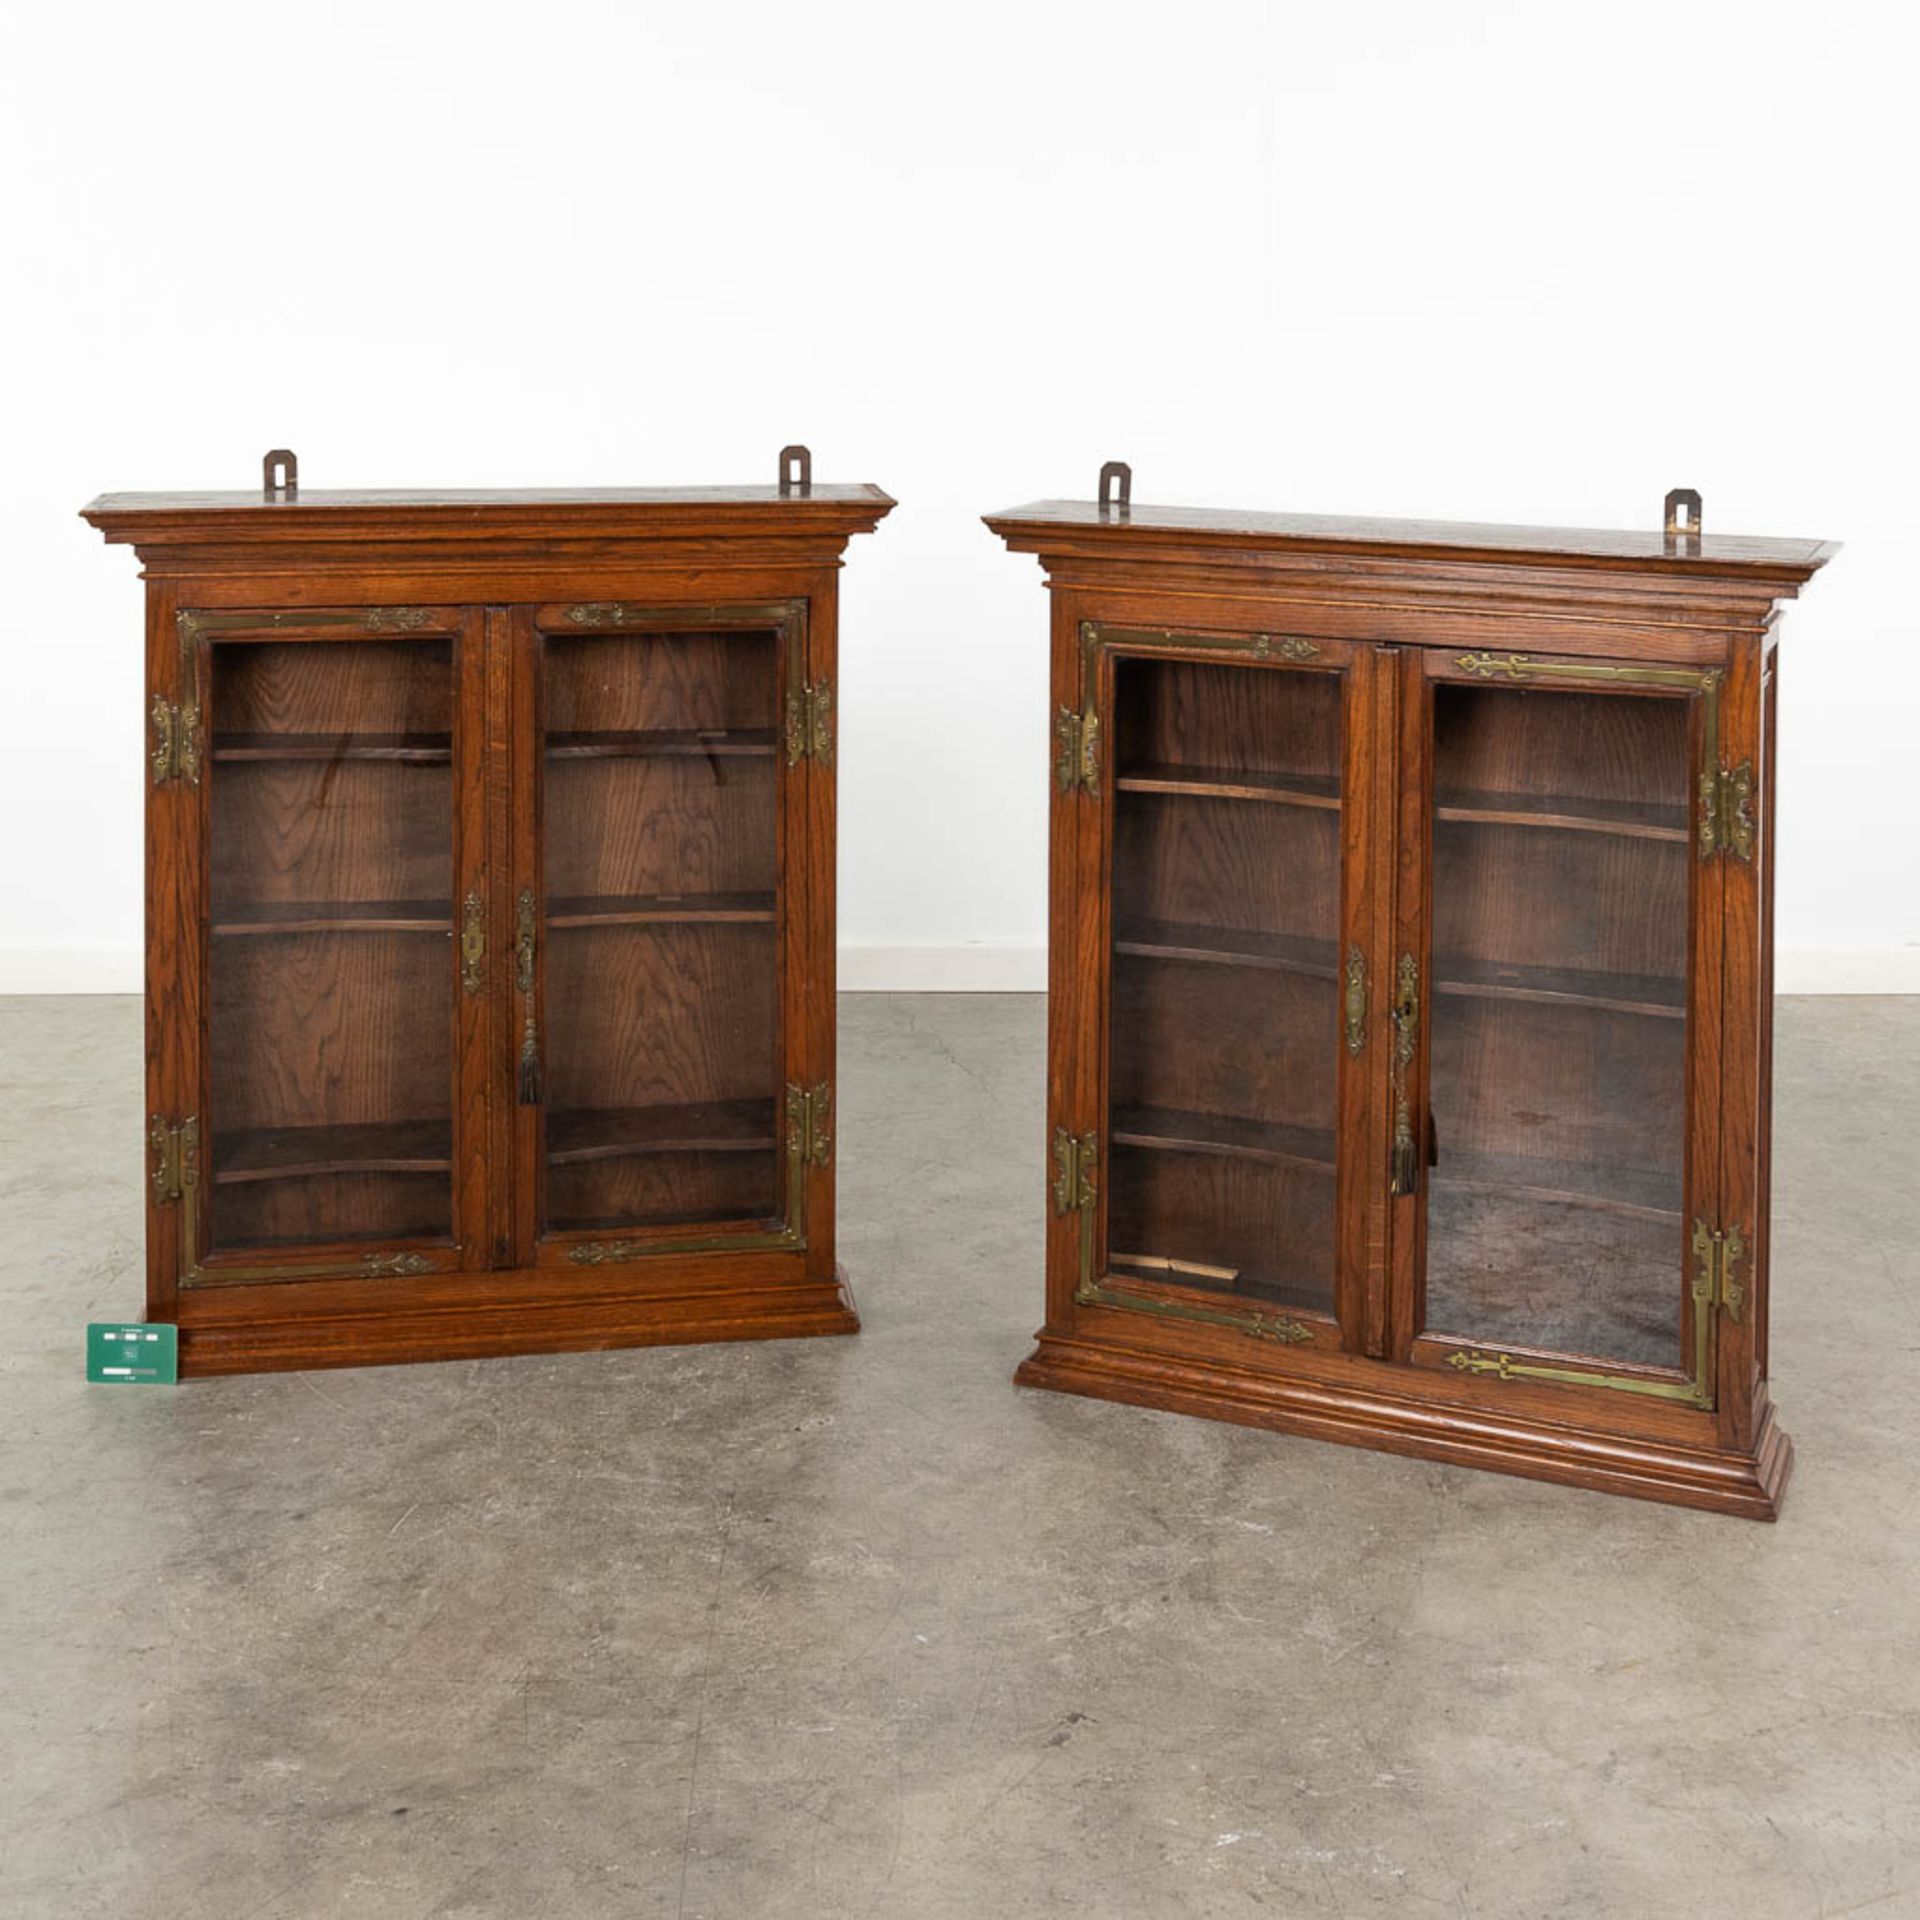 A pair of hanging cabinets, wood and glass. Circa 1900. (L: 17 x W: 75 x H: 83 cm) - Image 2 of 9